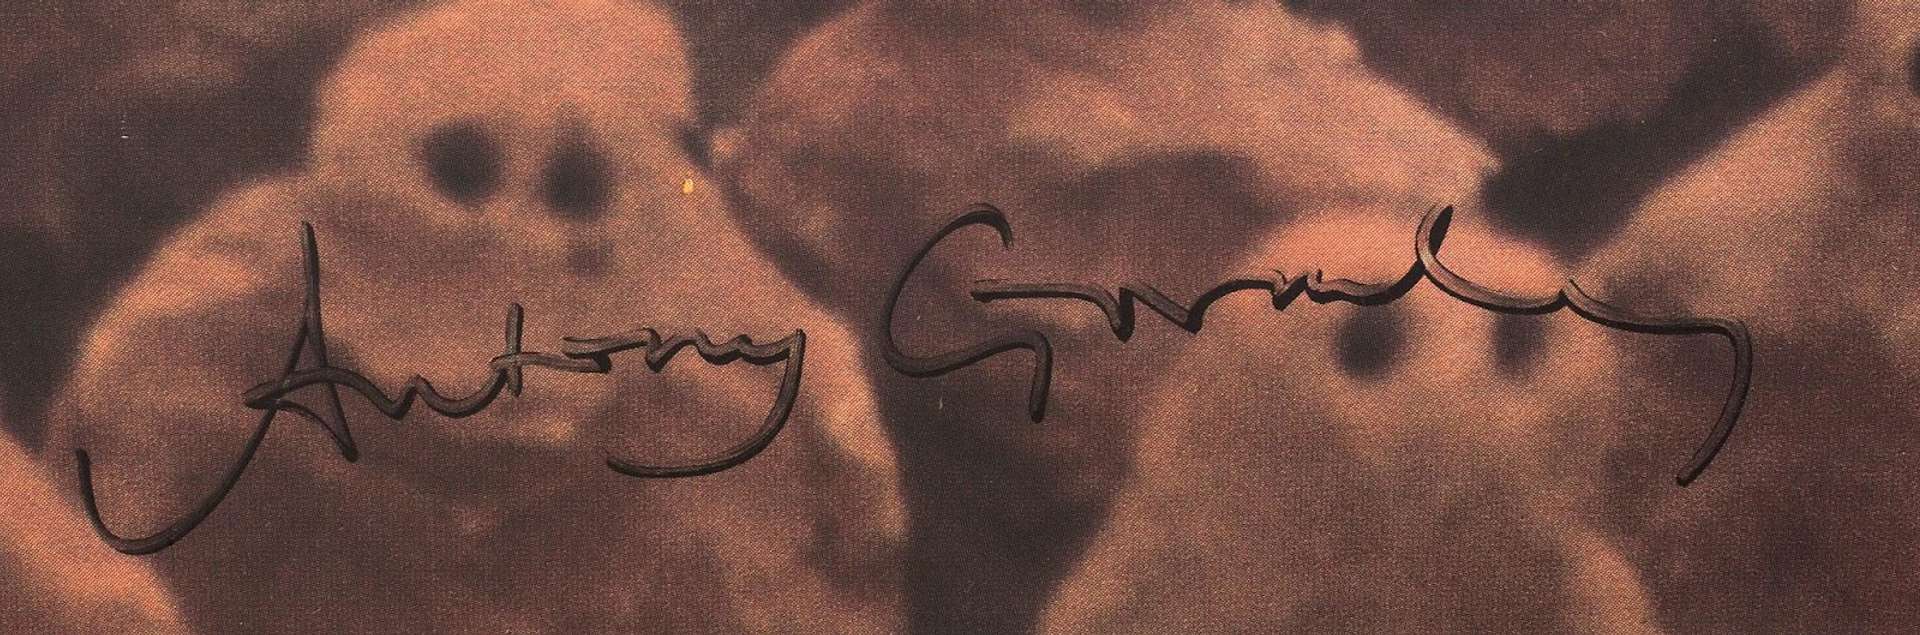 The signature of Antony Gormley, on a poster for one of his exhibitions in 1993.